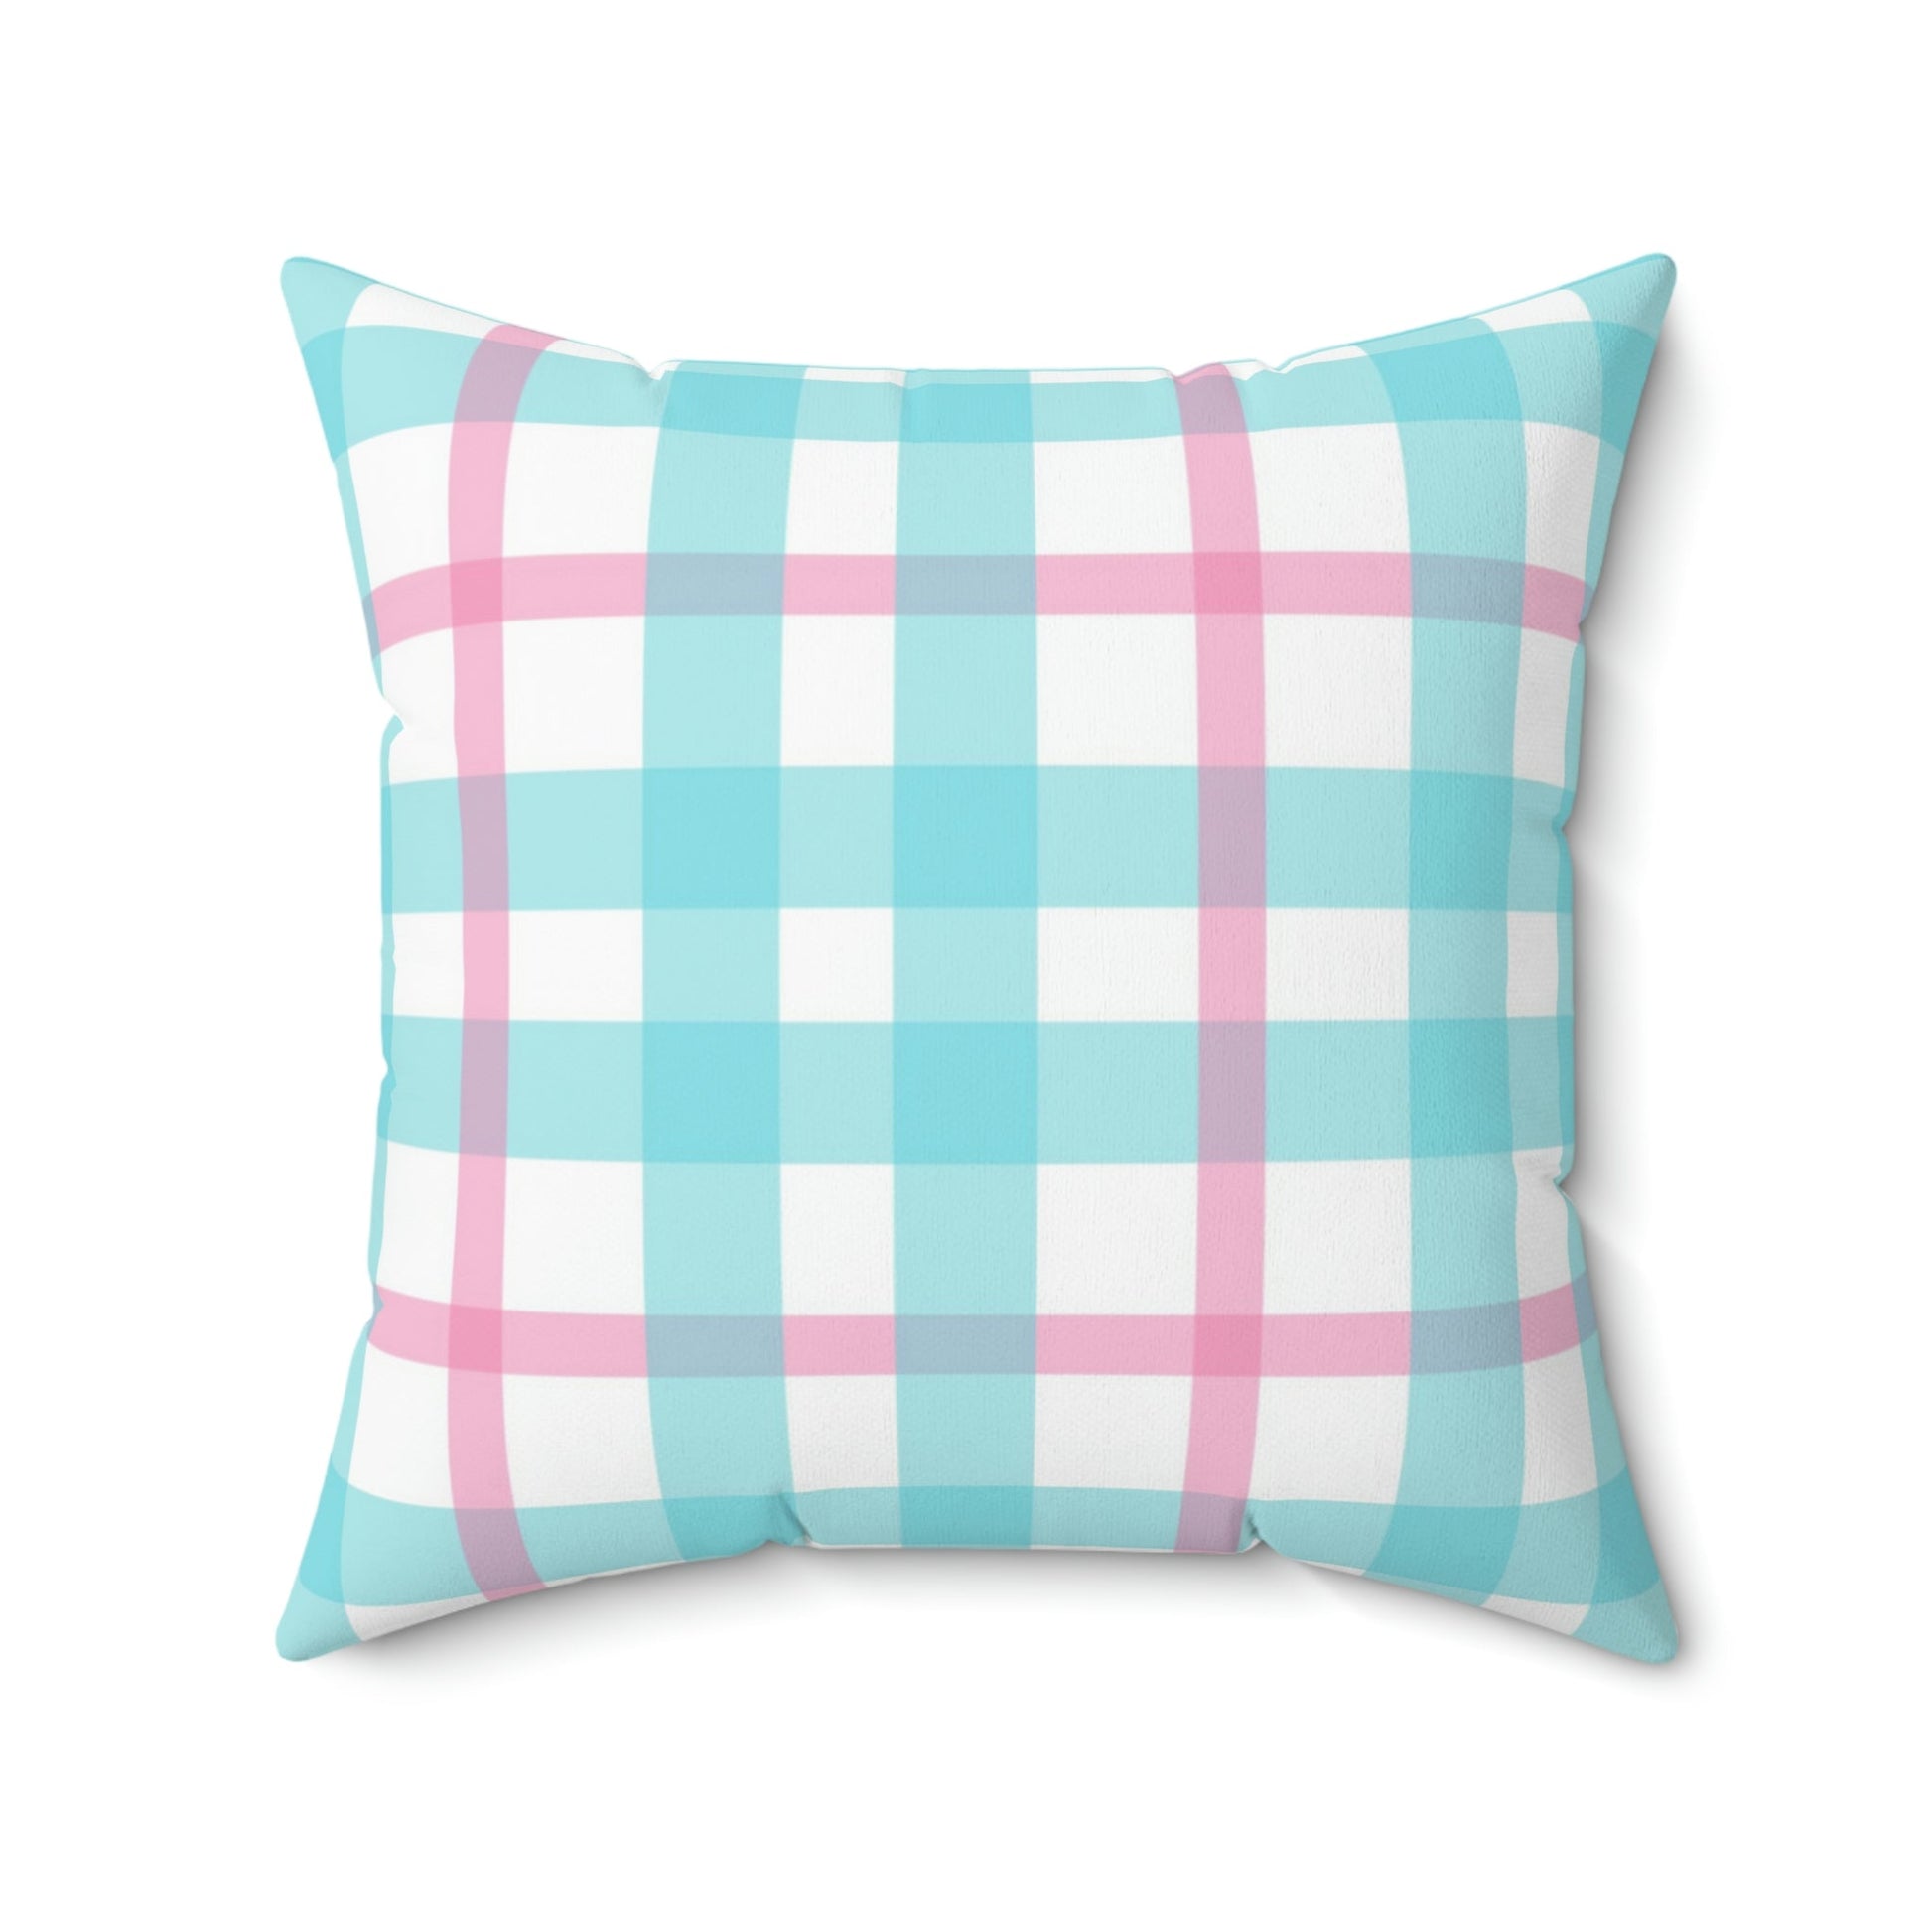 Vibrant Gingham Square Pillow Home Decor Pink Sweetheart